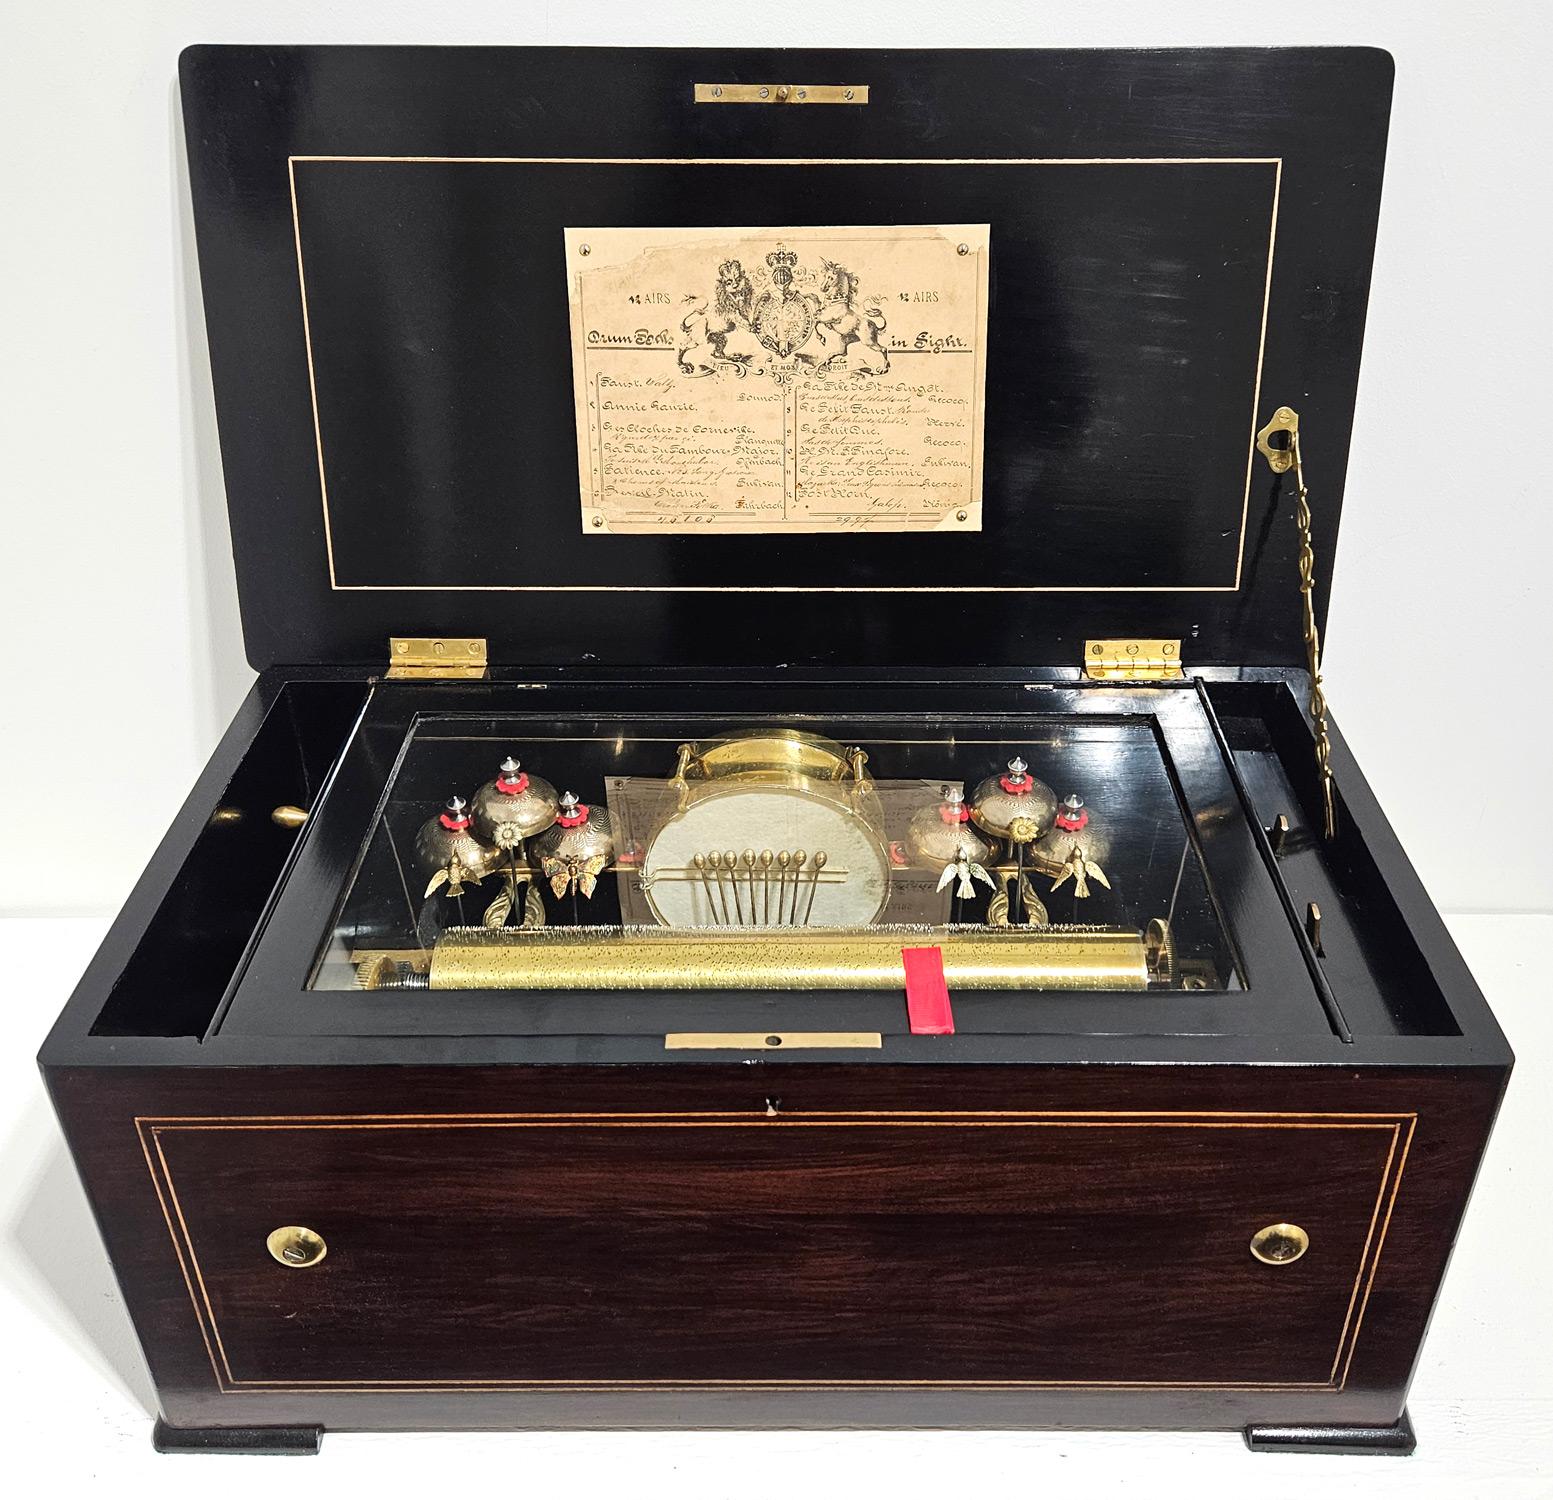 A fine quality antique music box made by George Bendon of Geneva, Switzerland in c. 1880. 

The musical movement features 6 engraved bells struck by a delightful array of figurative strikers – 4 hummingbirds, 2 flowers, and 1 butterfly. The central